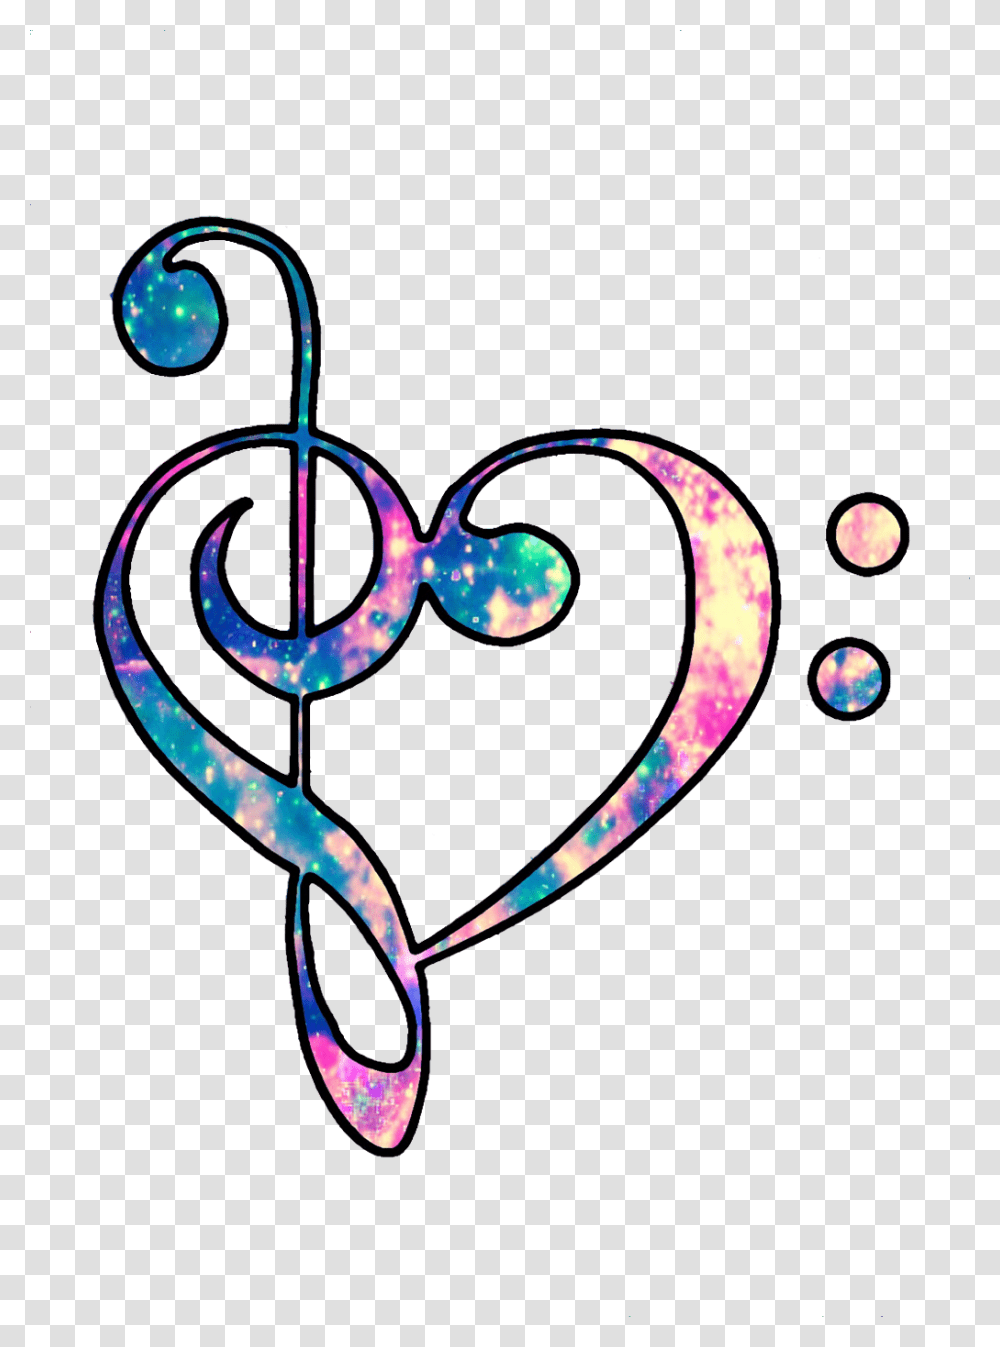 Рингтон amore. Colorful Music Notes. Музыка сердца. Music Notes PNG. Colourful Music Notes and Hearts as background.